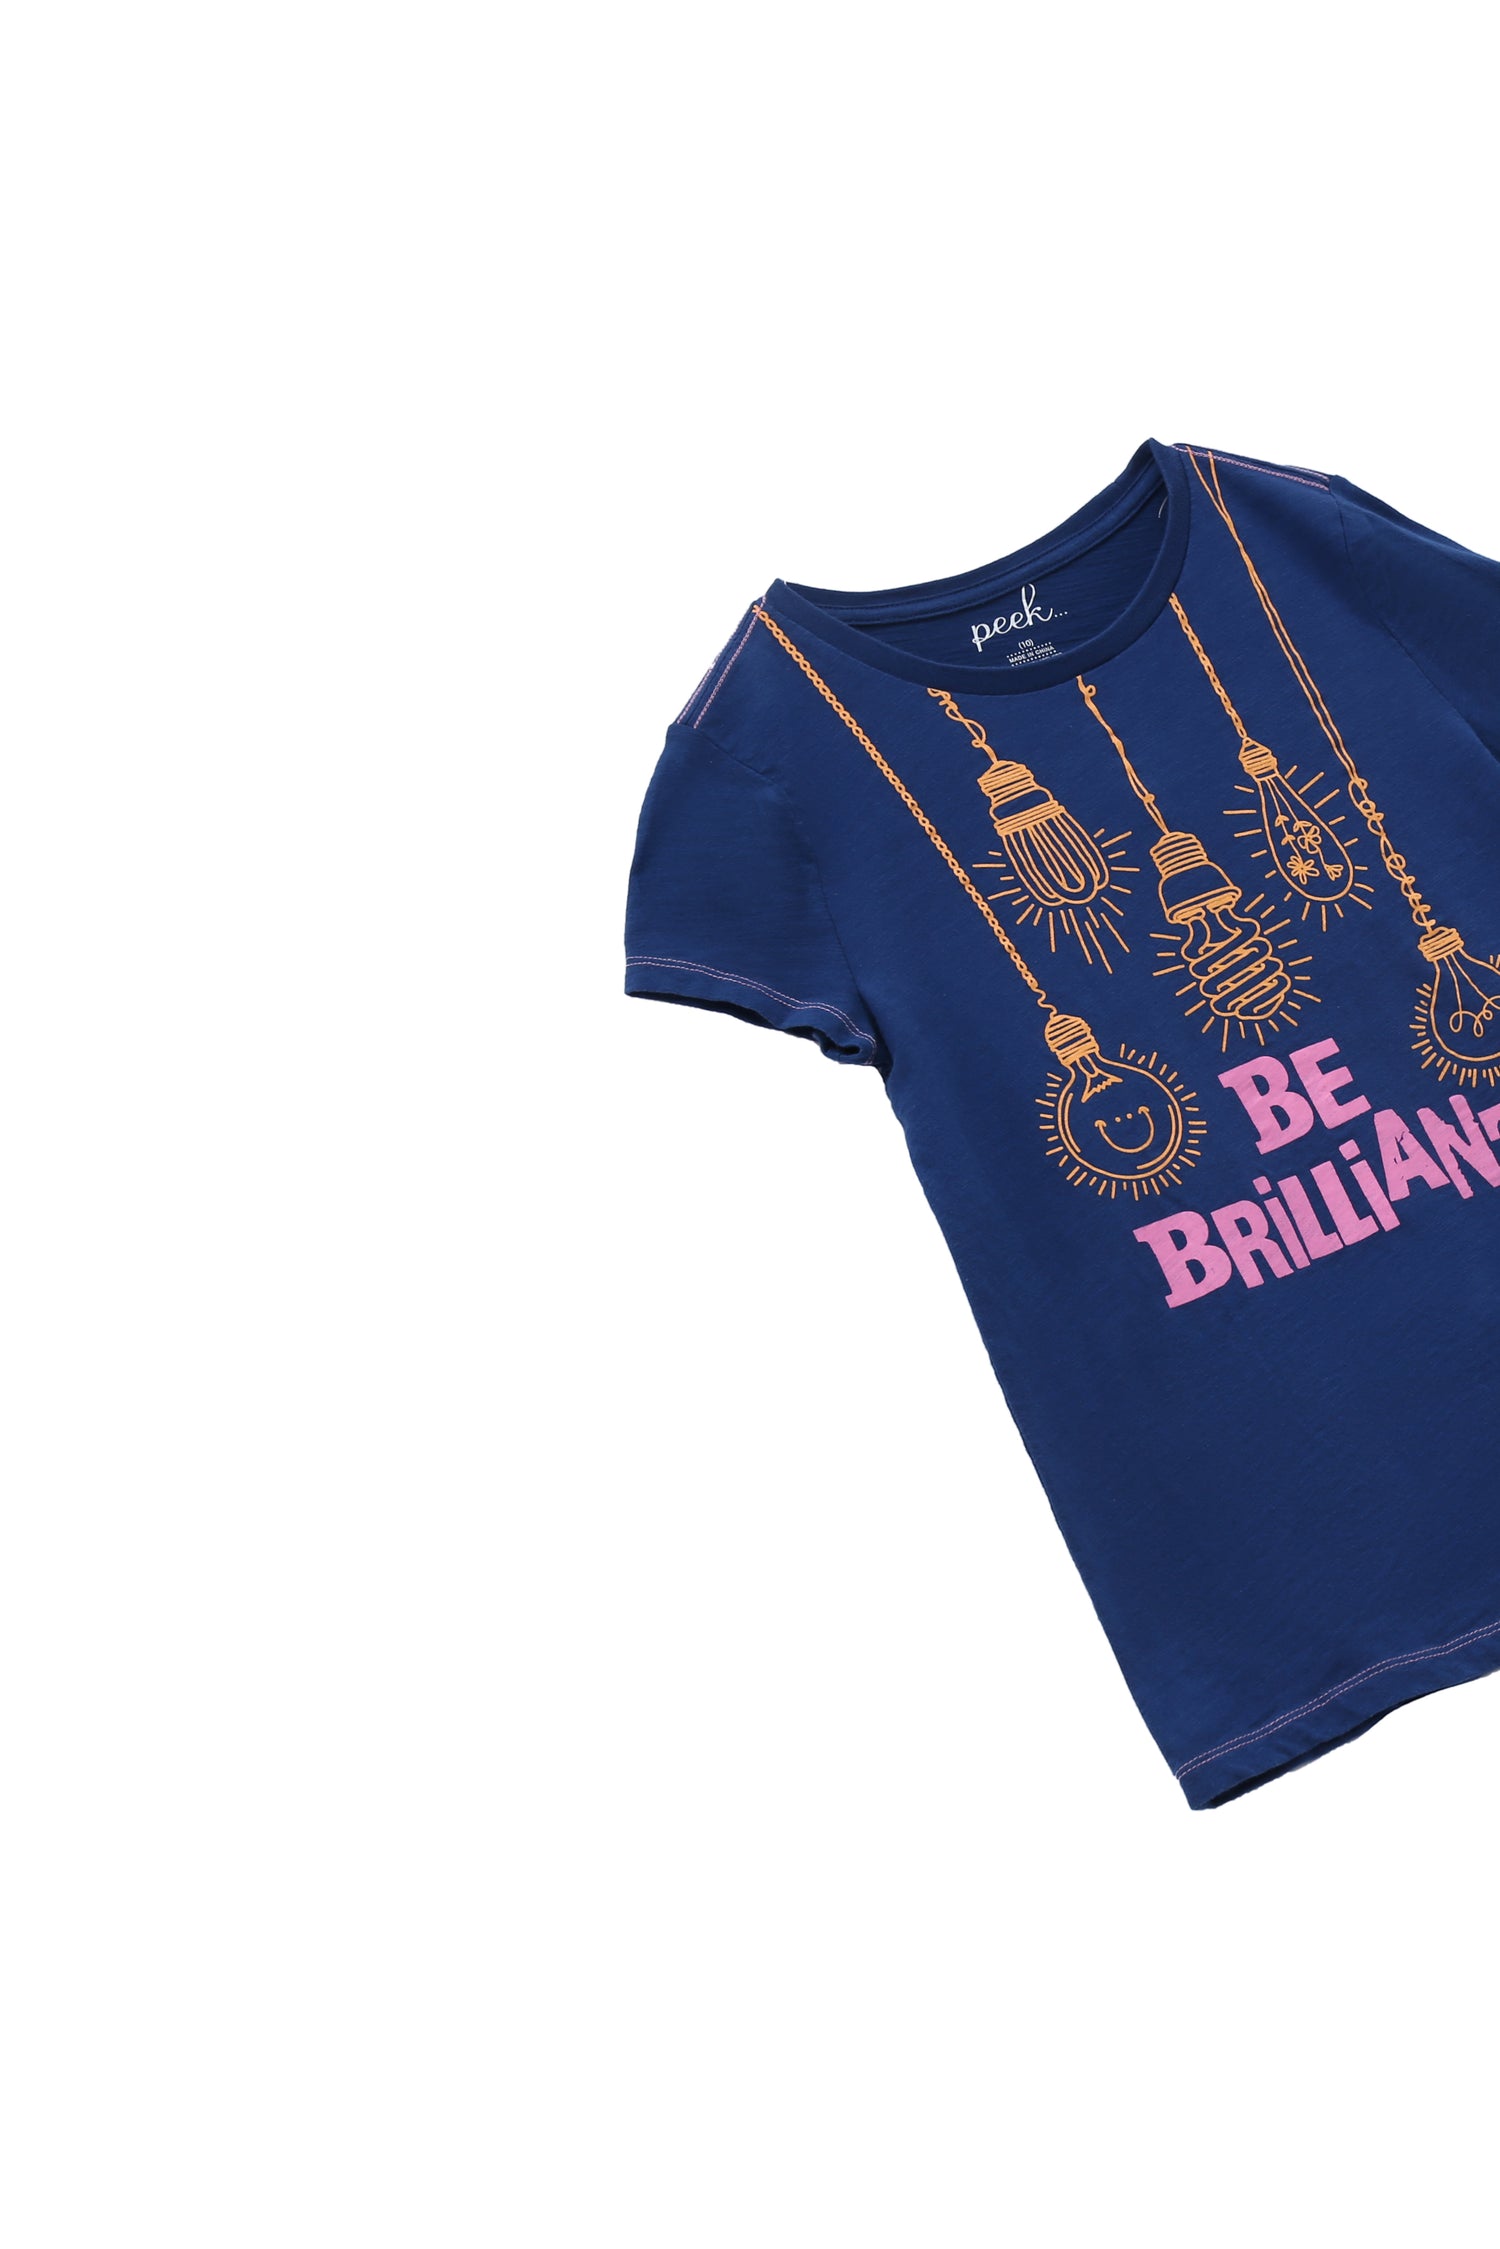 CLOSE UP OF DARK BLUE T-SHIRT WITH HANGING LIGHTBULB GRAPHICS AND THE WORDS "BE BRILLIANT" ON THE FRONT